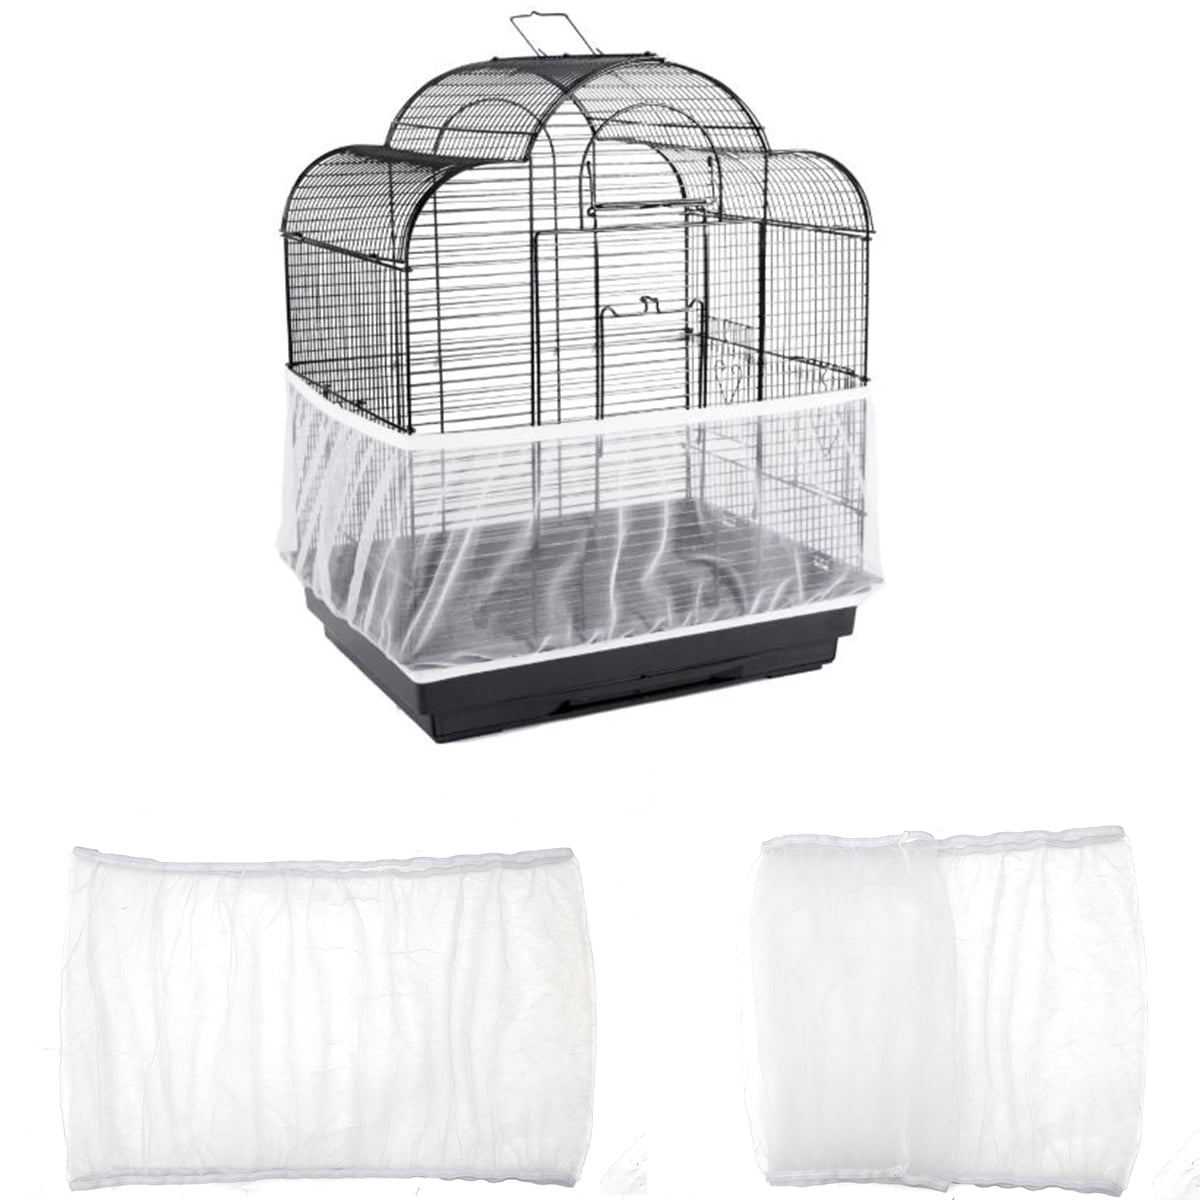 QBLEEV Bird Cage Cover Stretchy Seed Catcher Birdcage Nylon Mesh Net Cover Skirt Guard Shell 